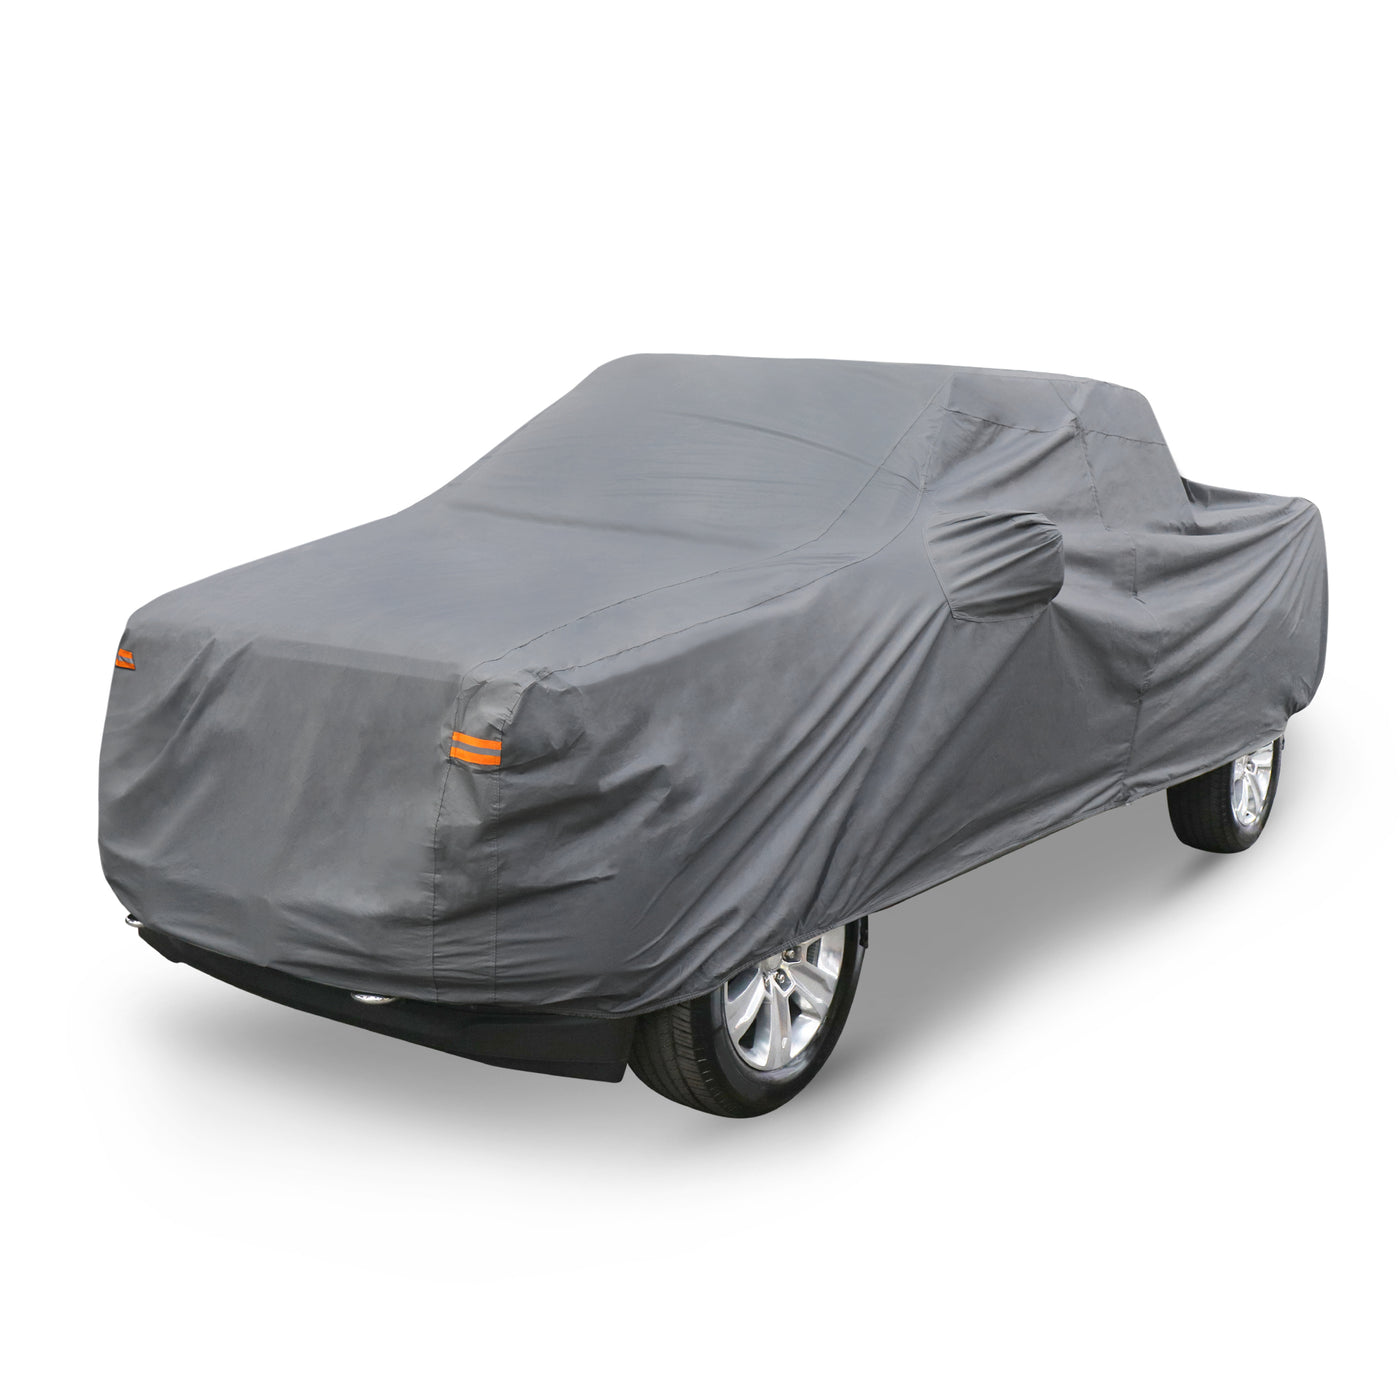 X AUTOHAUX Pickup Truck Car Cover for Ford F350 Crew Cab Short Bed 4 Door 08-21 for Ford f150 Extended Cab 8ft Bed 4 Door 04-21 Waterproof Sun  Protection PEVA with Driver Door Zipper Gray